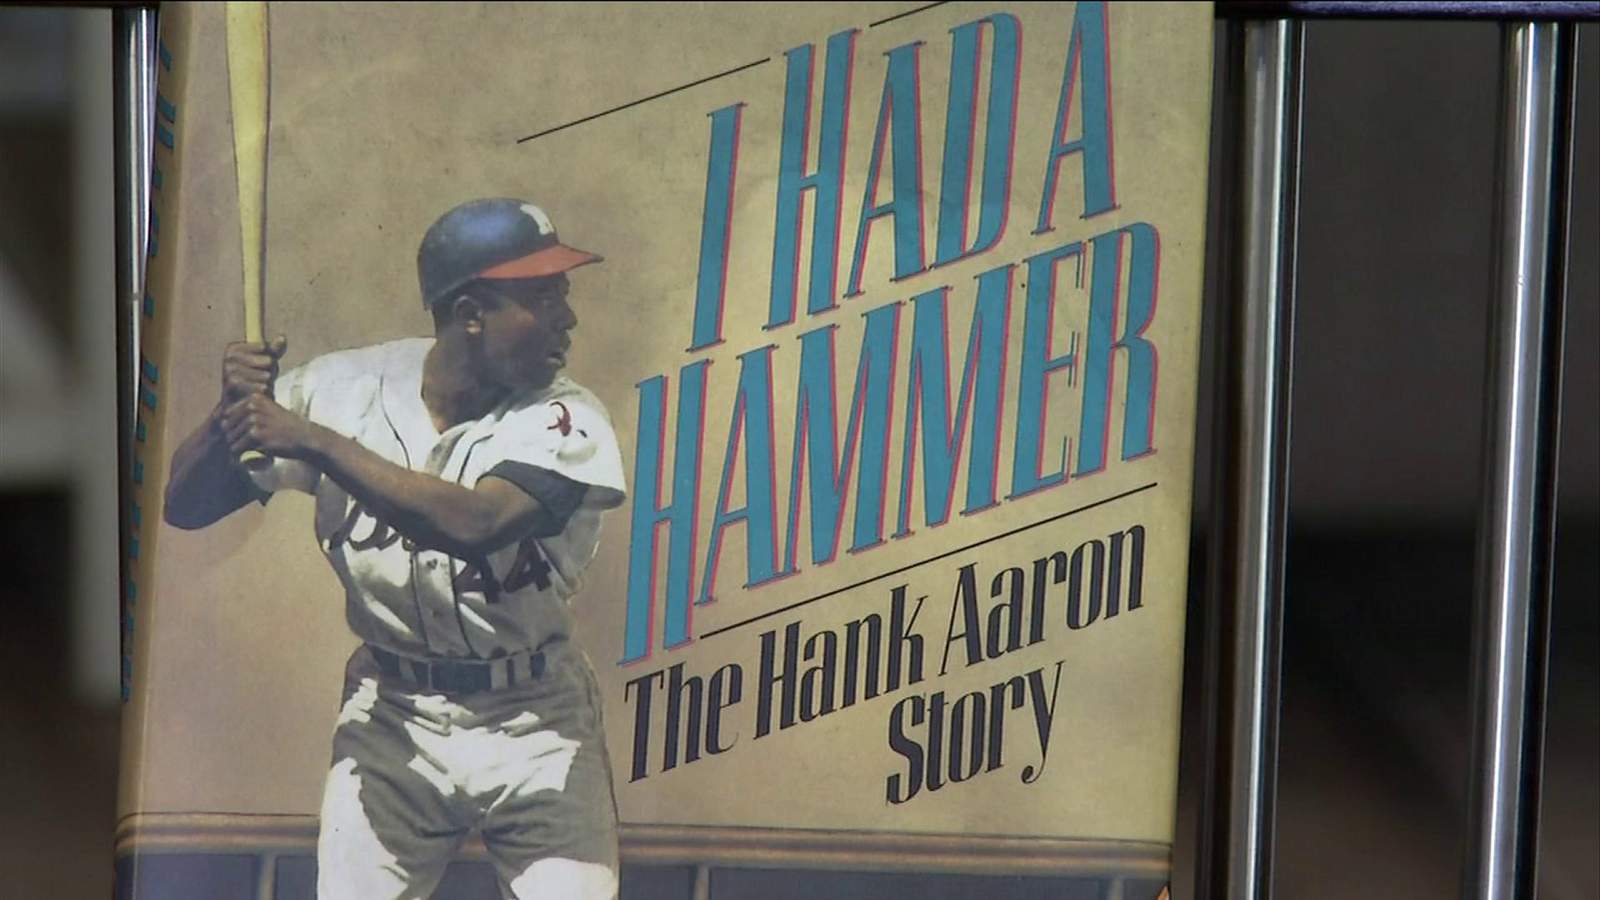 City council member hopes to name local field after Hank Aaron